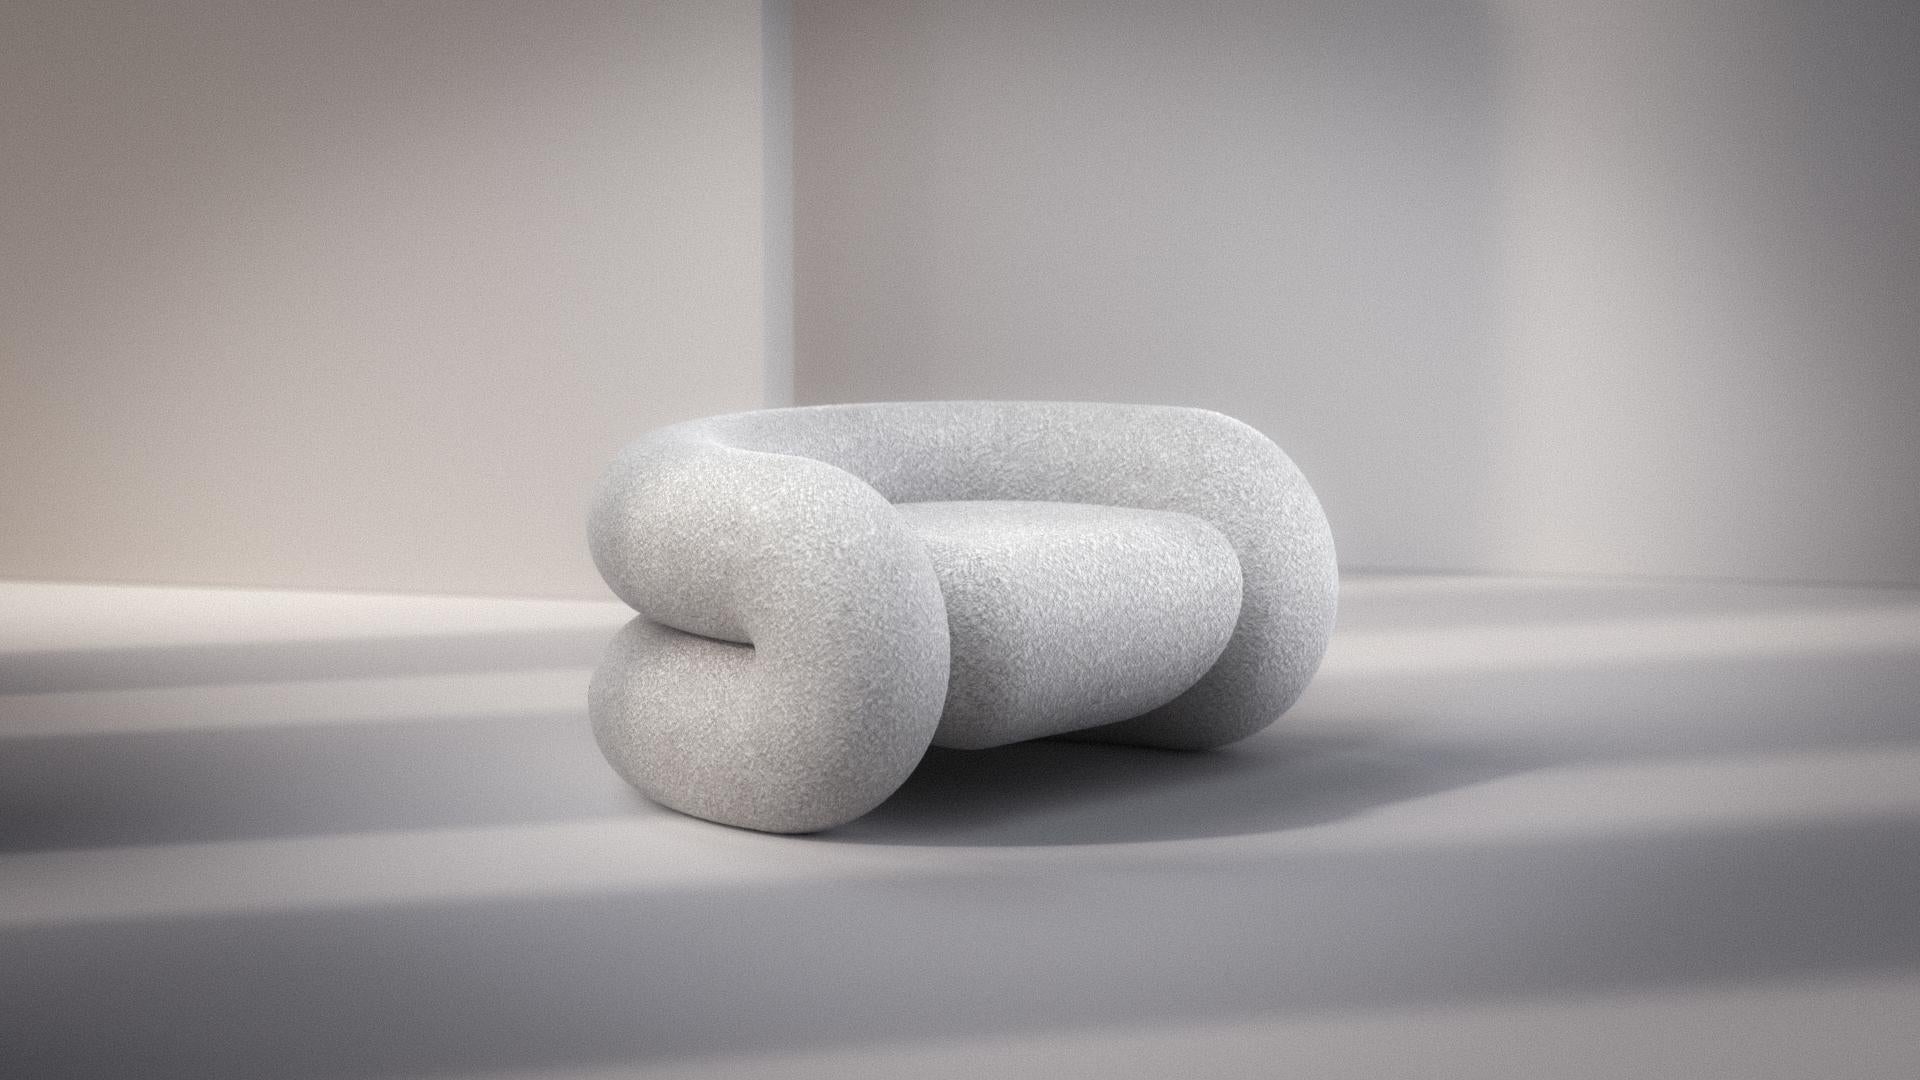 The Chubby Collection is an ode to the Colombian figurative artist Fernando Botero. Chubby borrows the roundness which becomes a sensual way to sculpt stone and give it an unique folded visual aspect.

Each piece is hand-made and the stone is